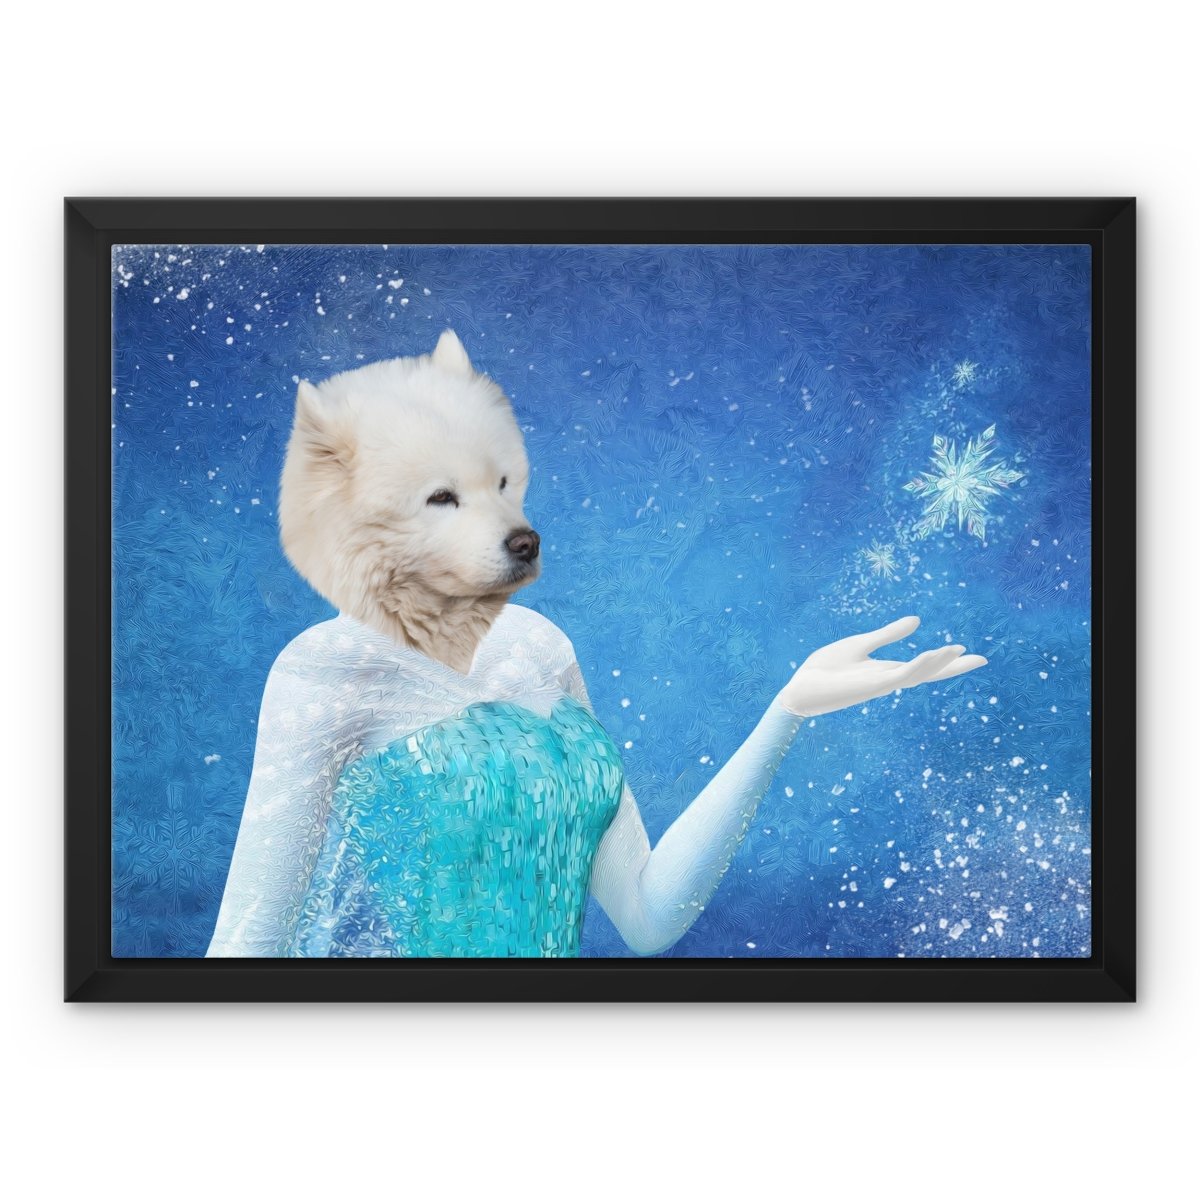 Elsa (Frozen Inspired): Custom Pet Canvas - Paw & Glory - #pet portraits# - #dog portraits# - #pet portraits uk#paw & glory, pet portraits canvas,custom pet canvas prints, dog pictures on canvas, dog canvas art custom, personalised cat canvas, dog wall art canvas